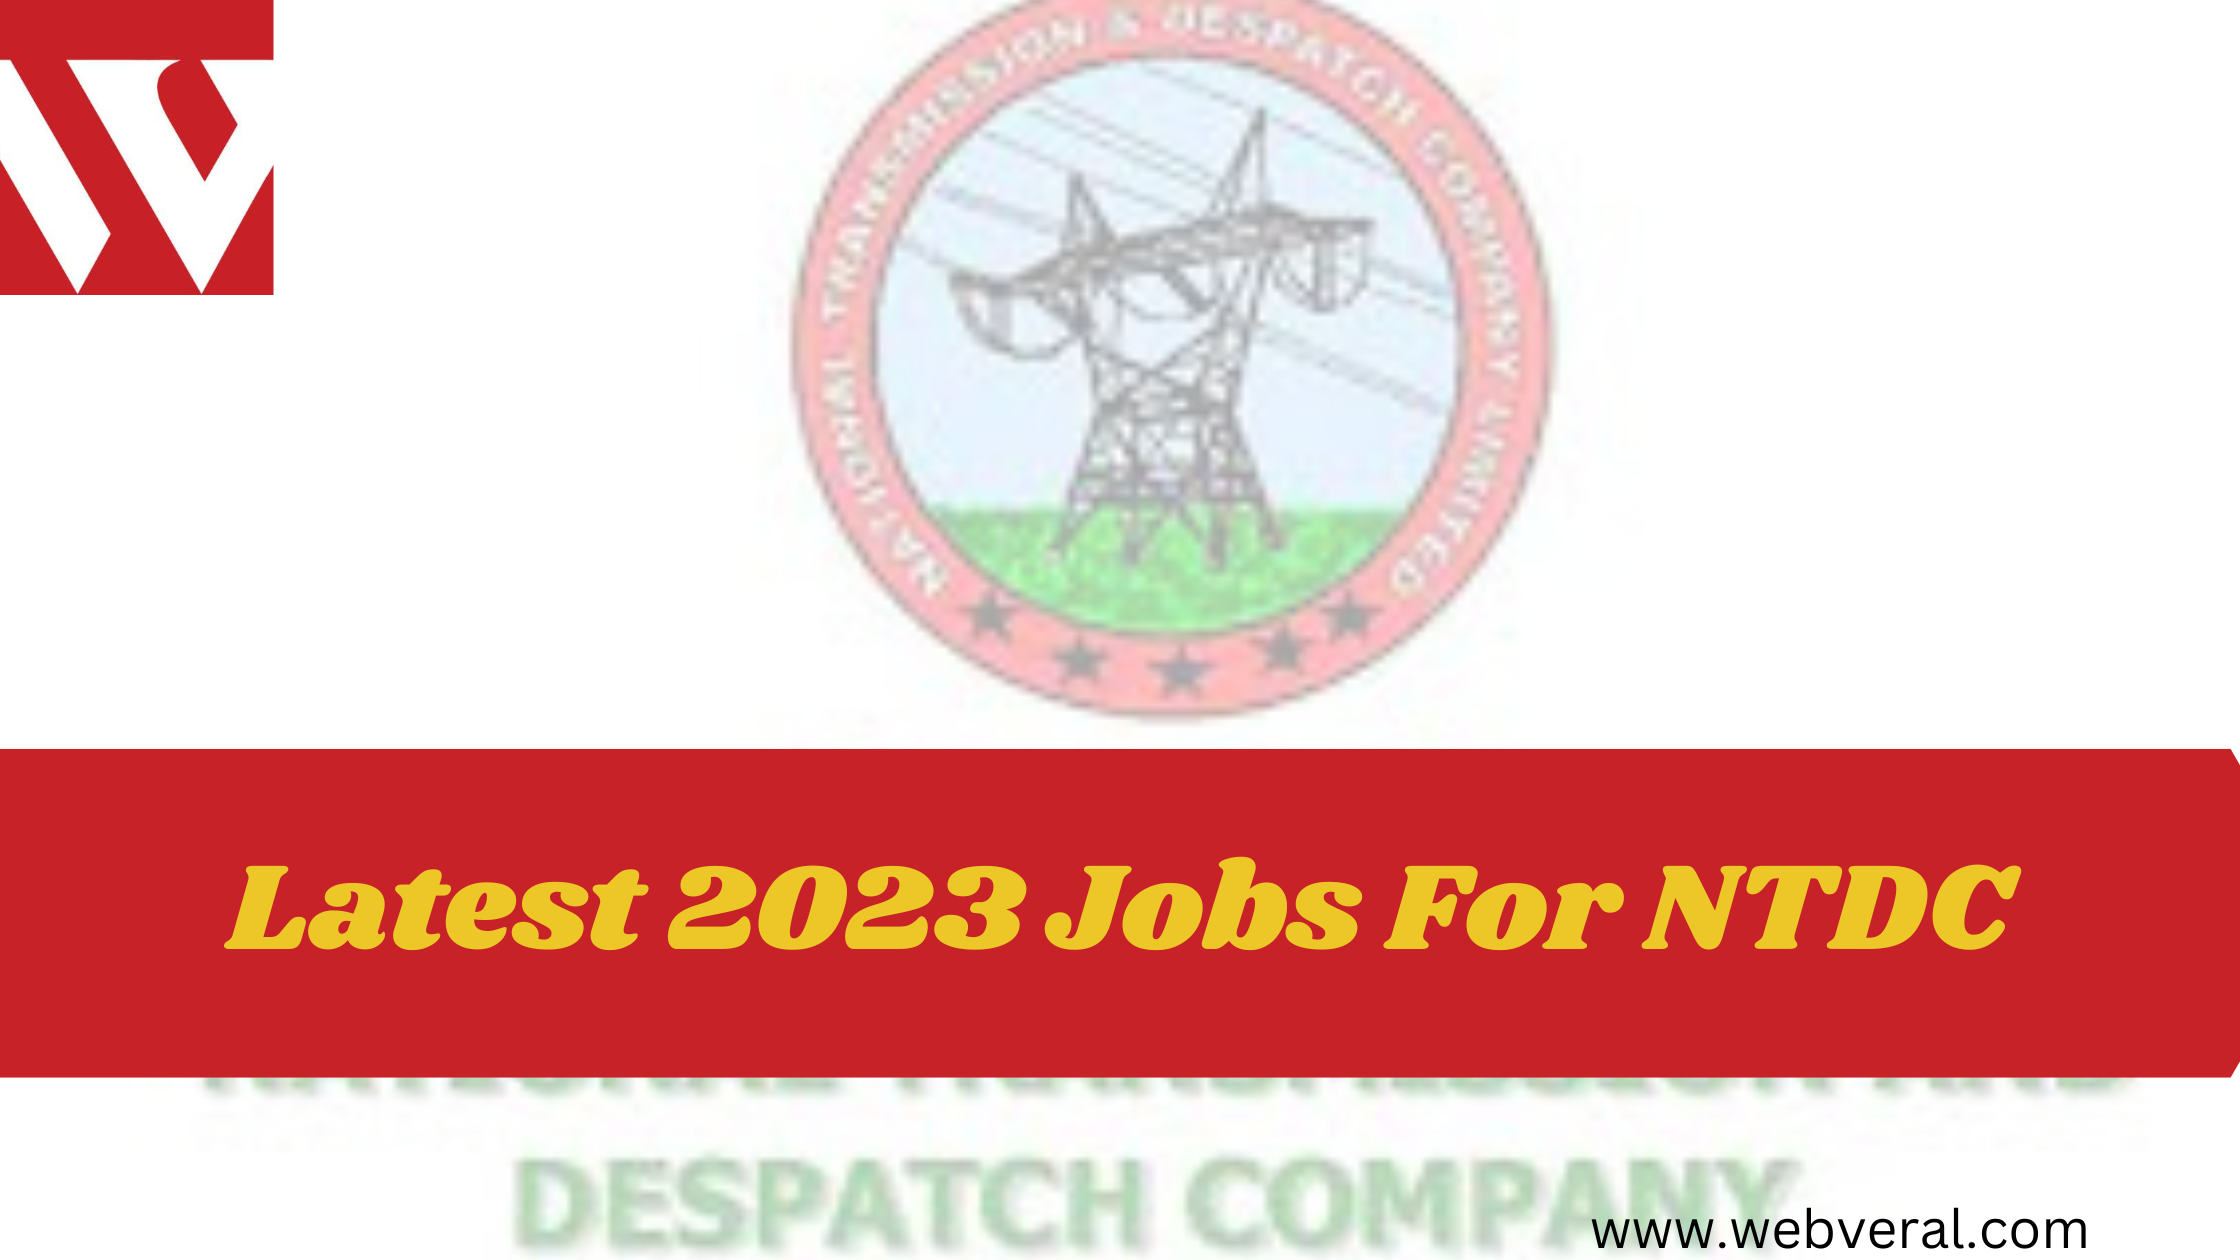 Latest 2023 Jobs For NTDC